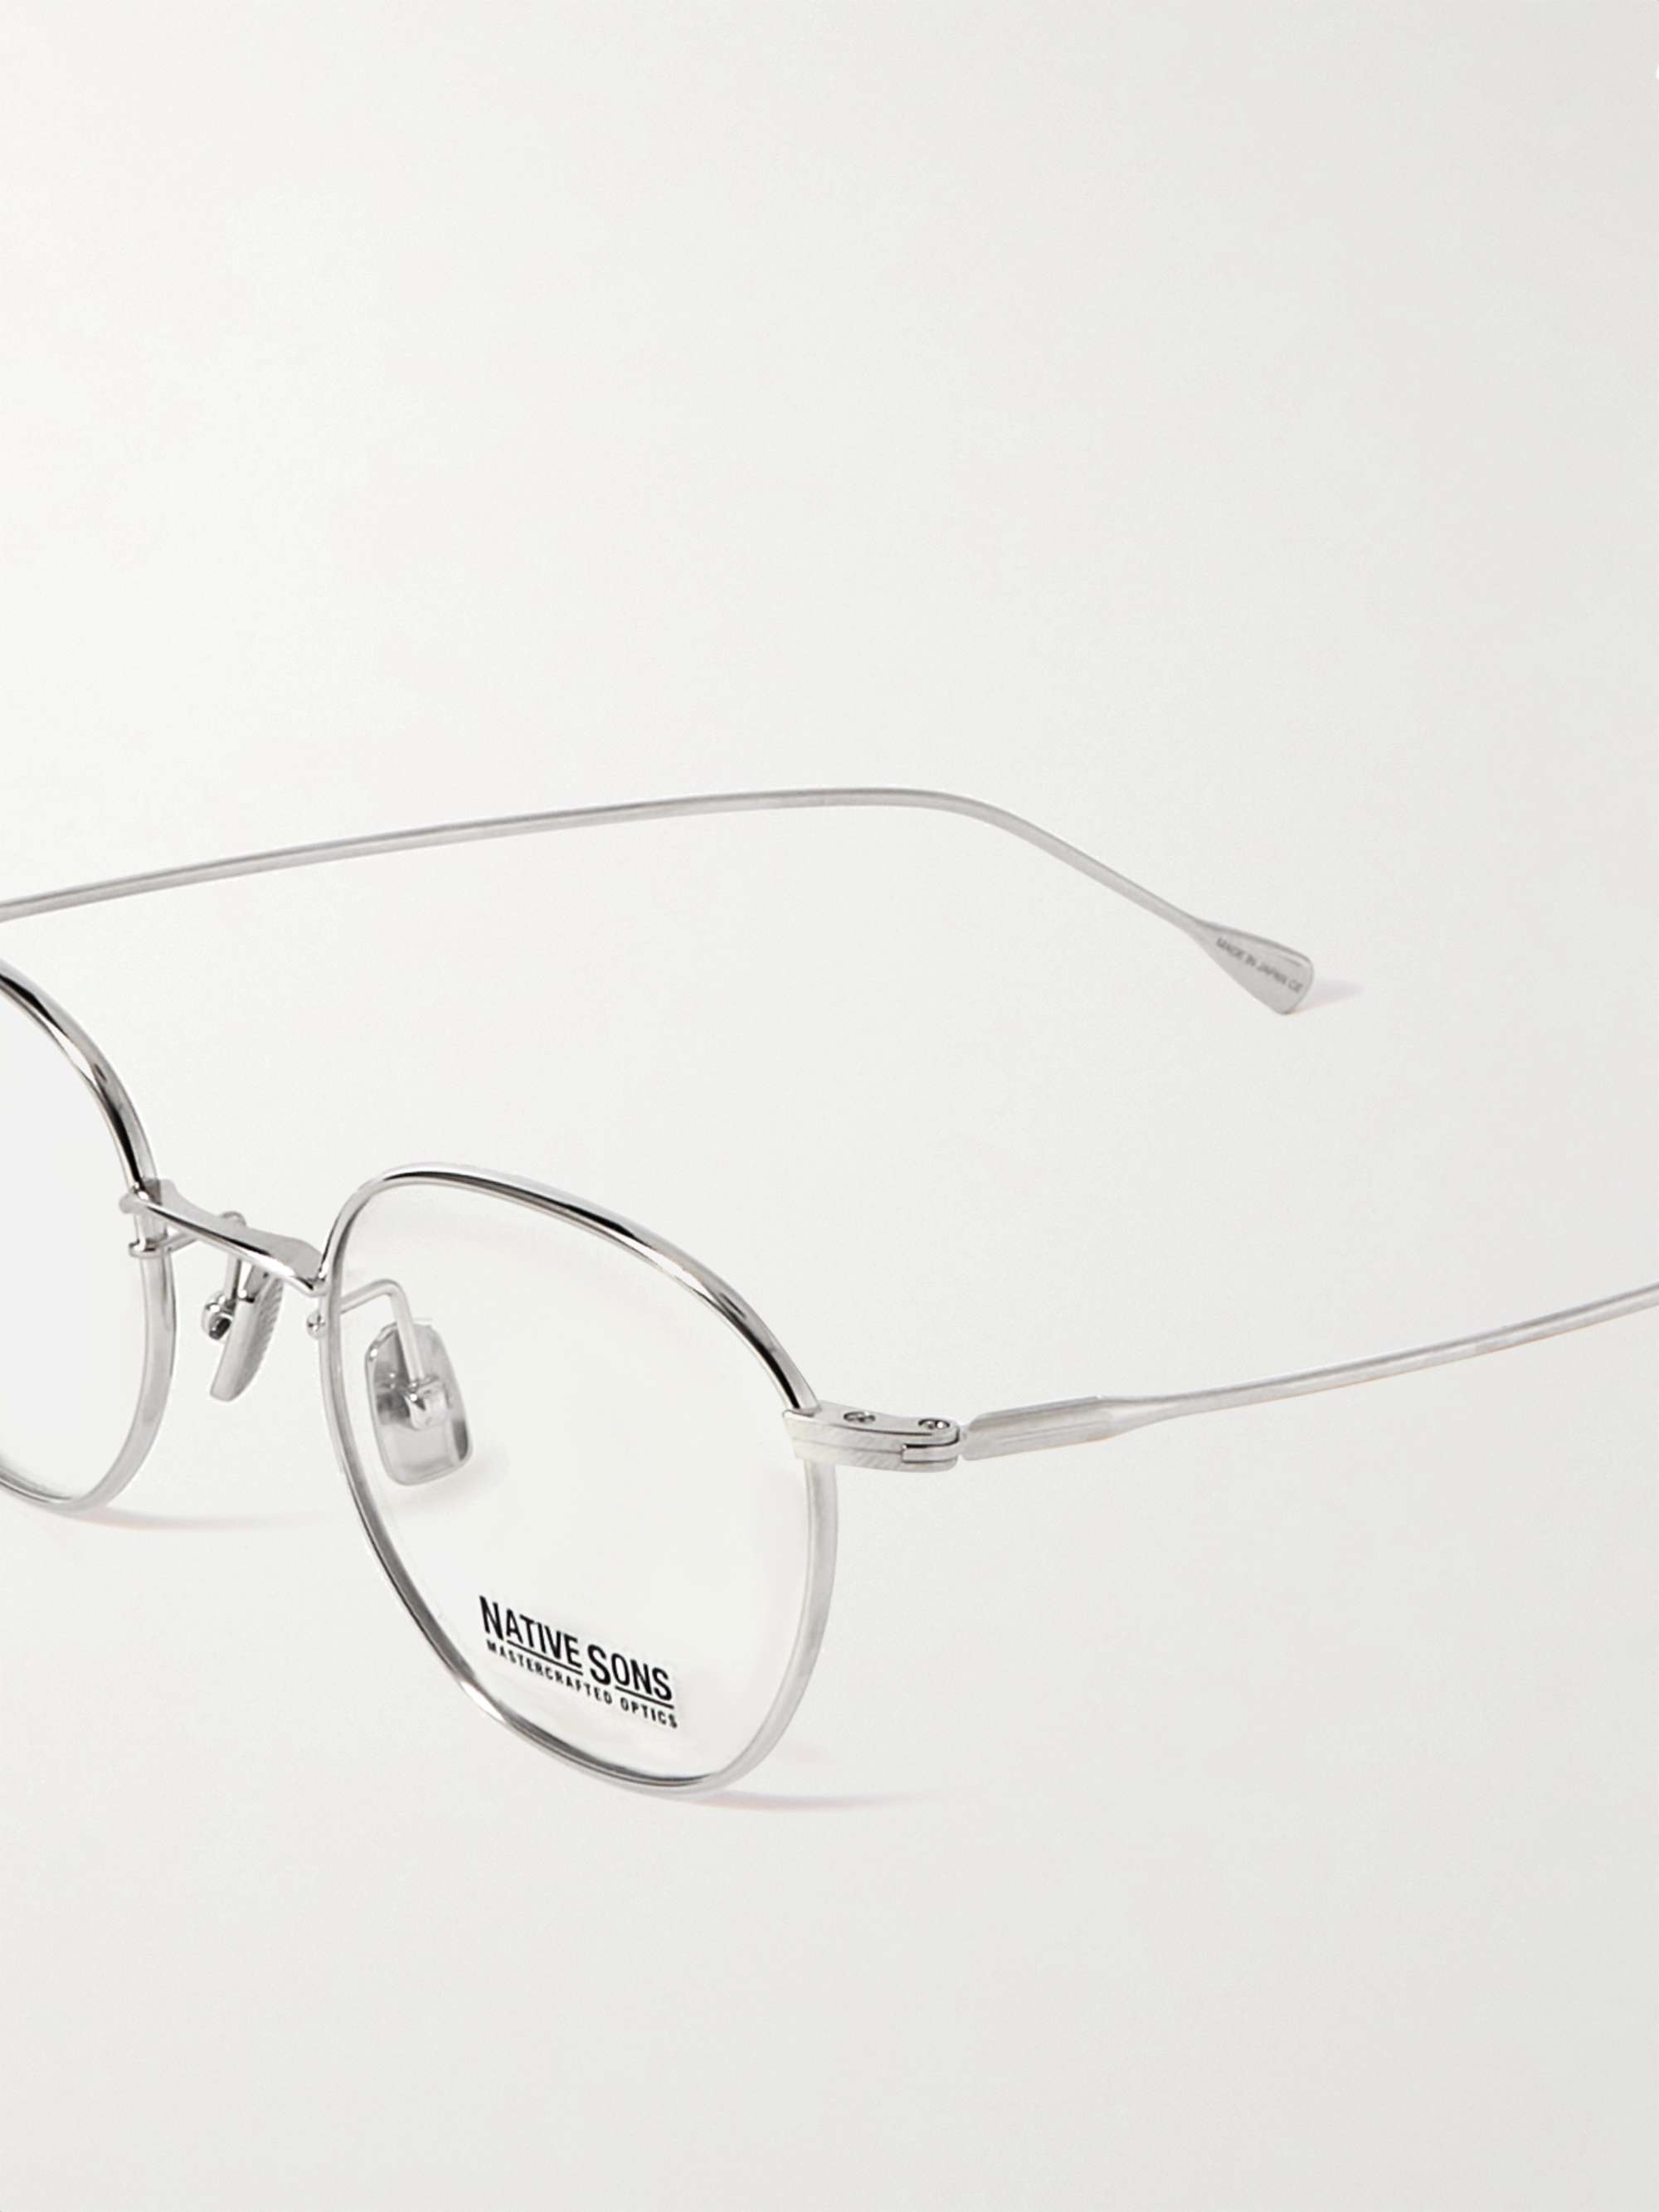 NATIVE SONS Roy 47 Round-Frame Silver-Tone Optical Glasses